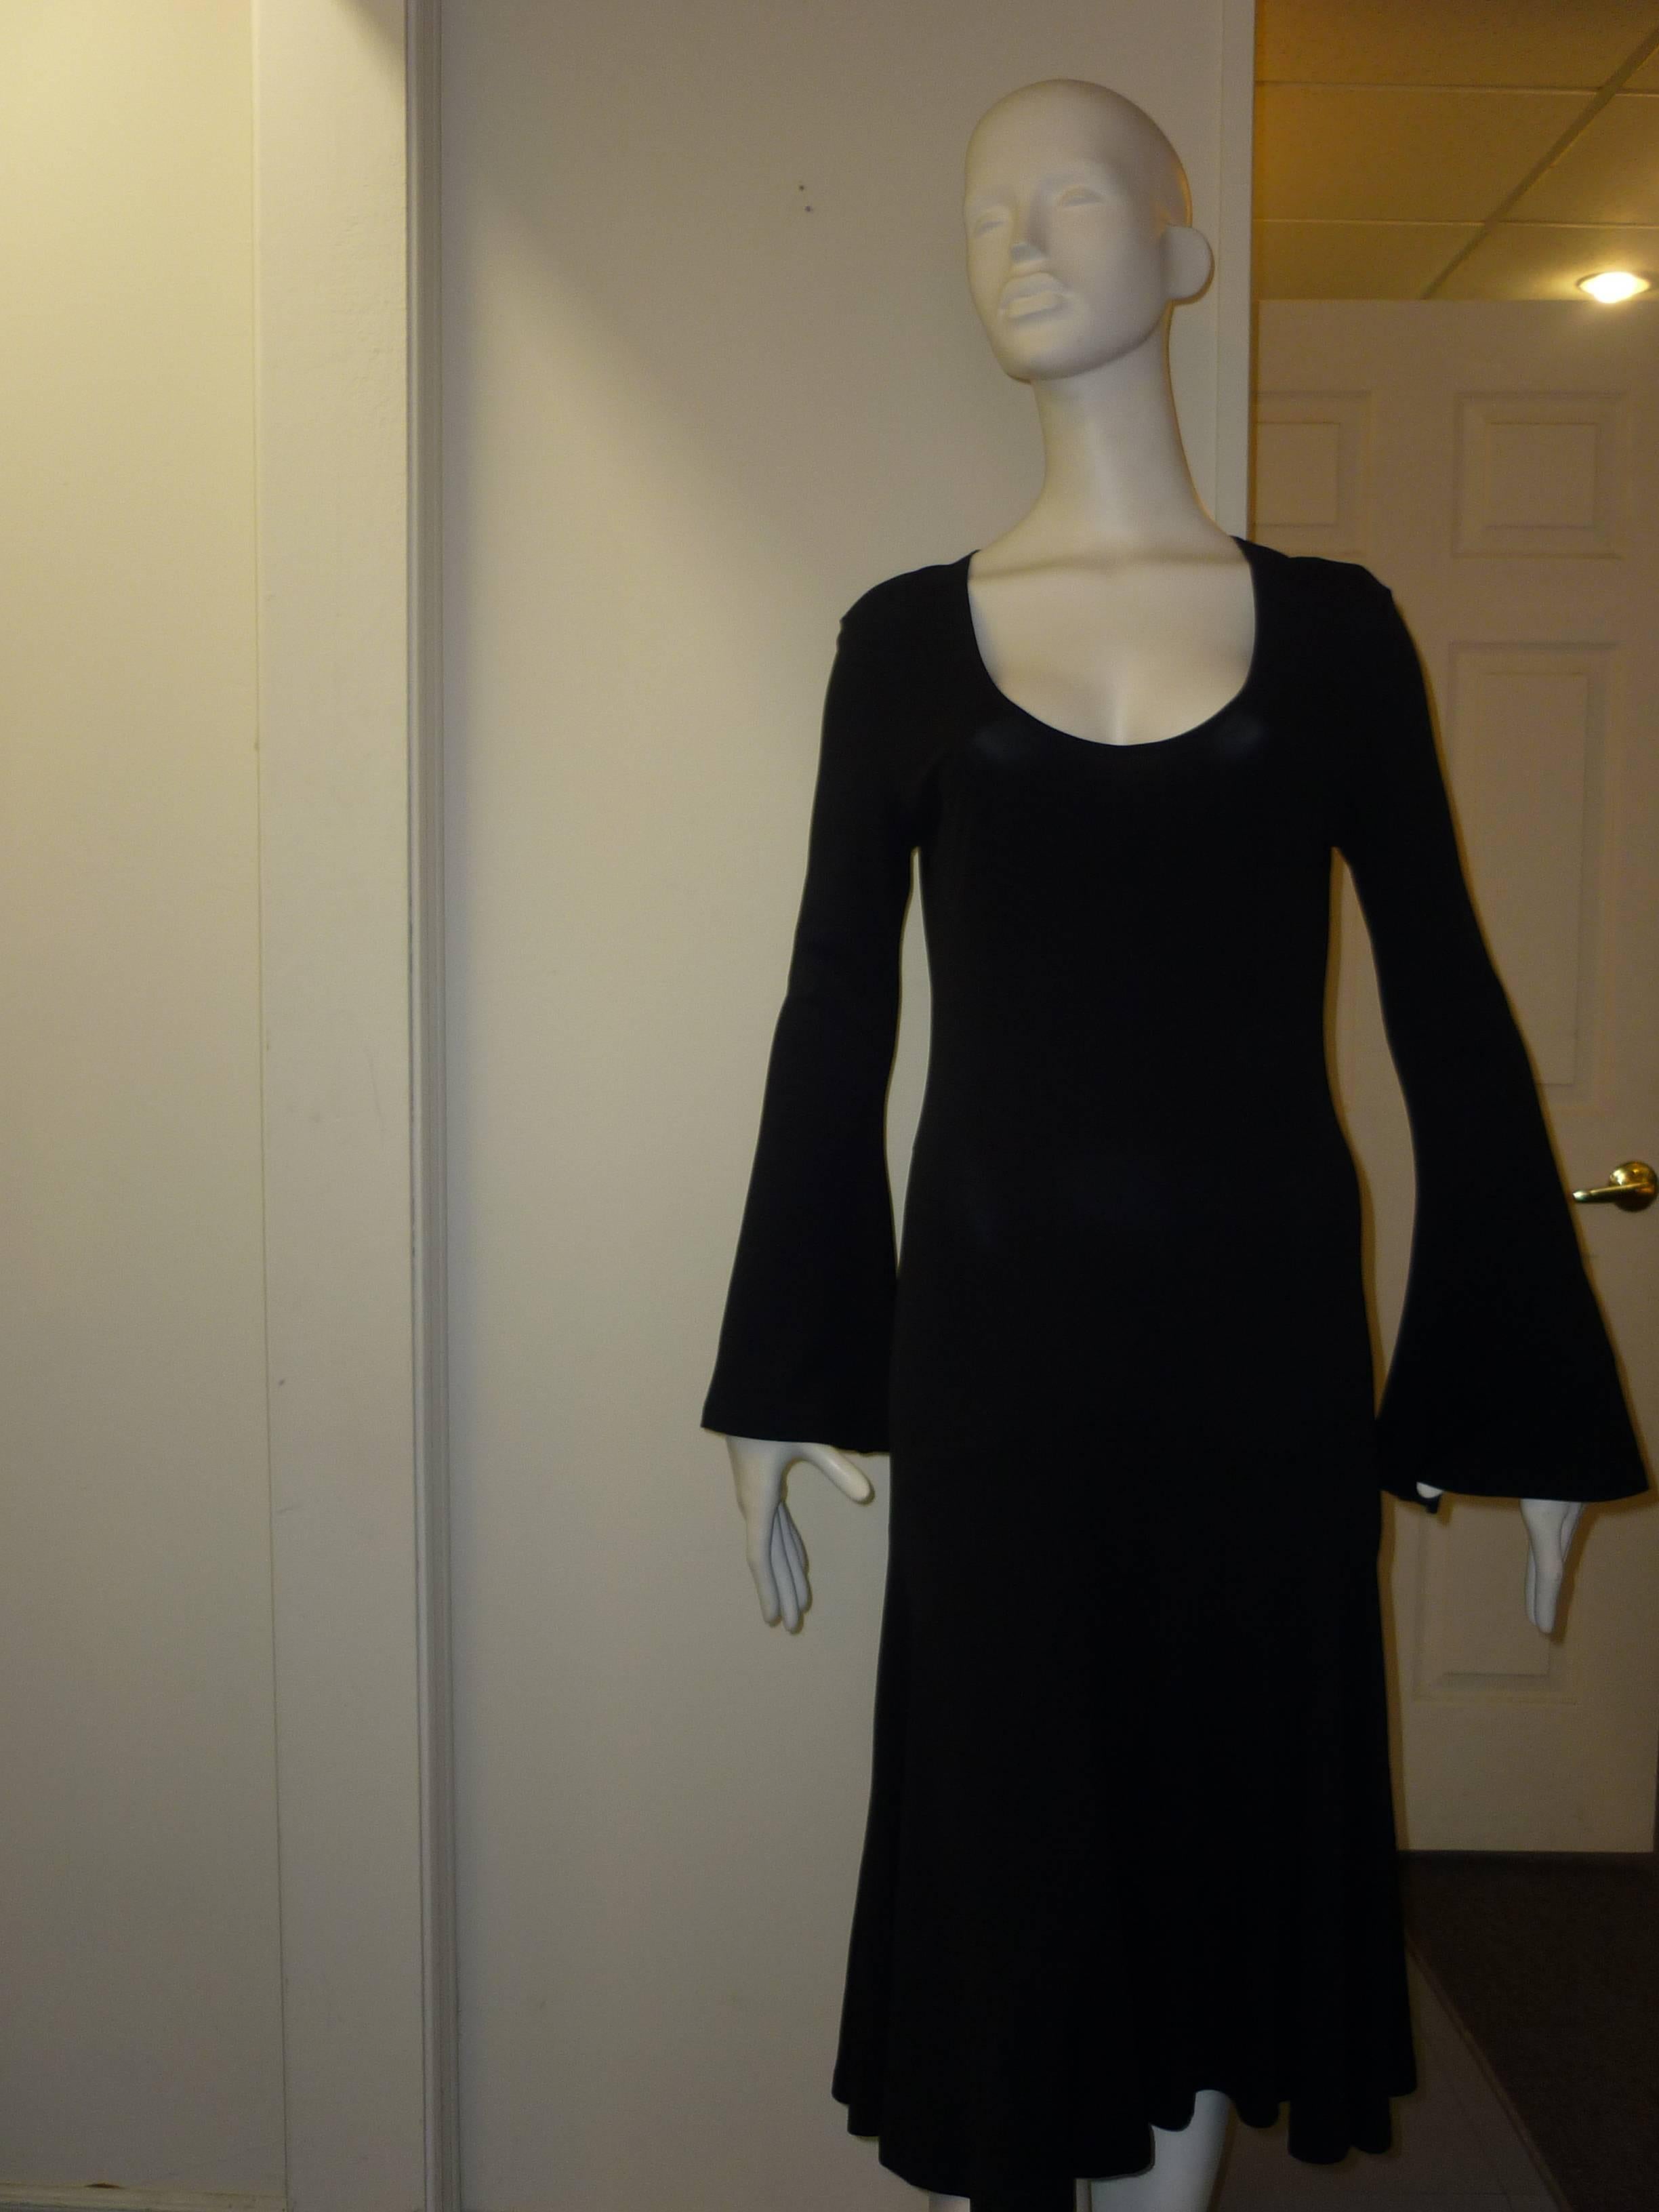 Low neckline angel sleeves and a gaudet skirt make this a very wearable and attractive dress.

The material is rayon with 5% spandex. Made in Italy, this dress was never worn.